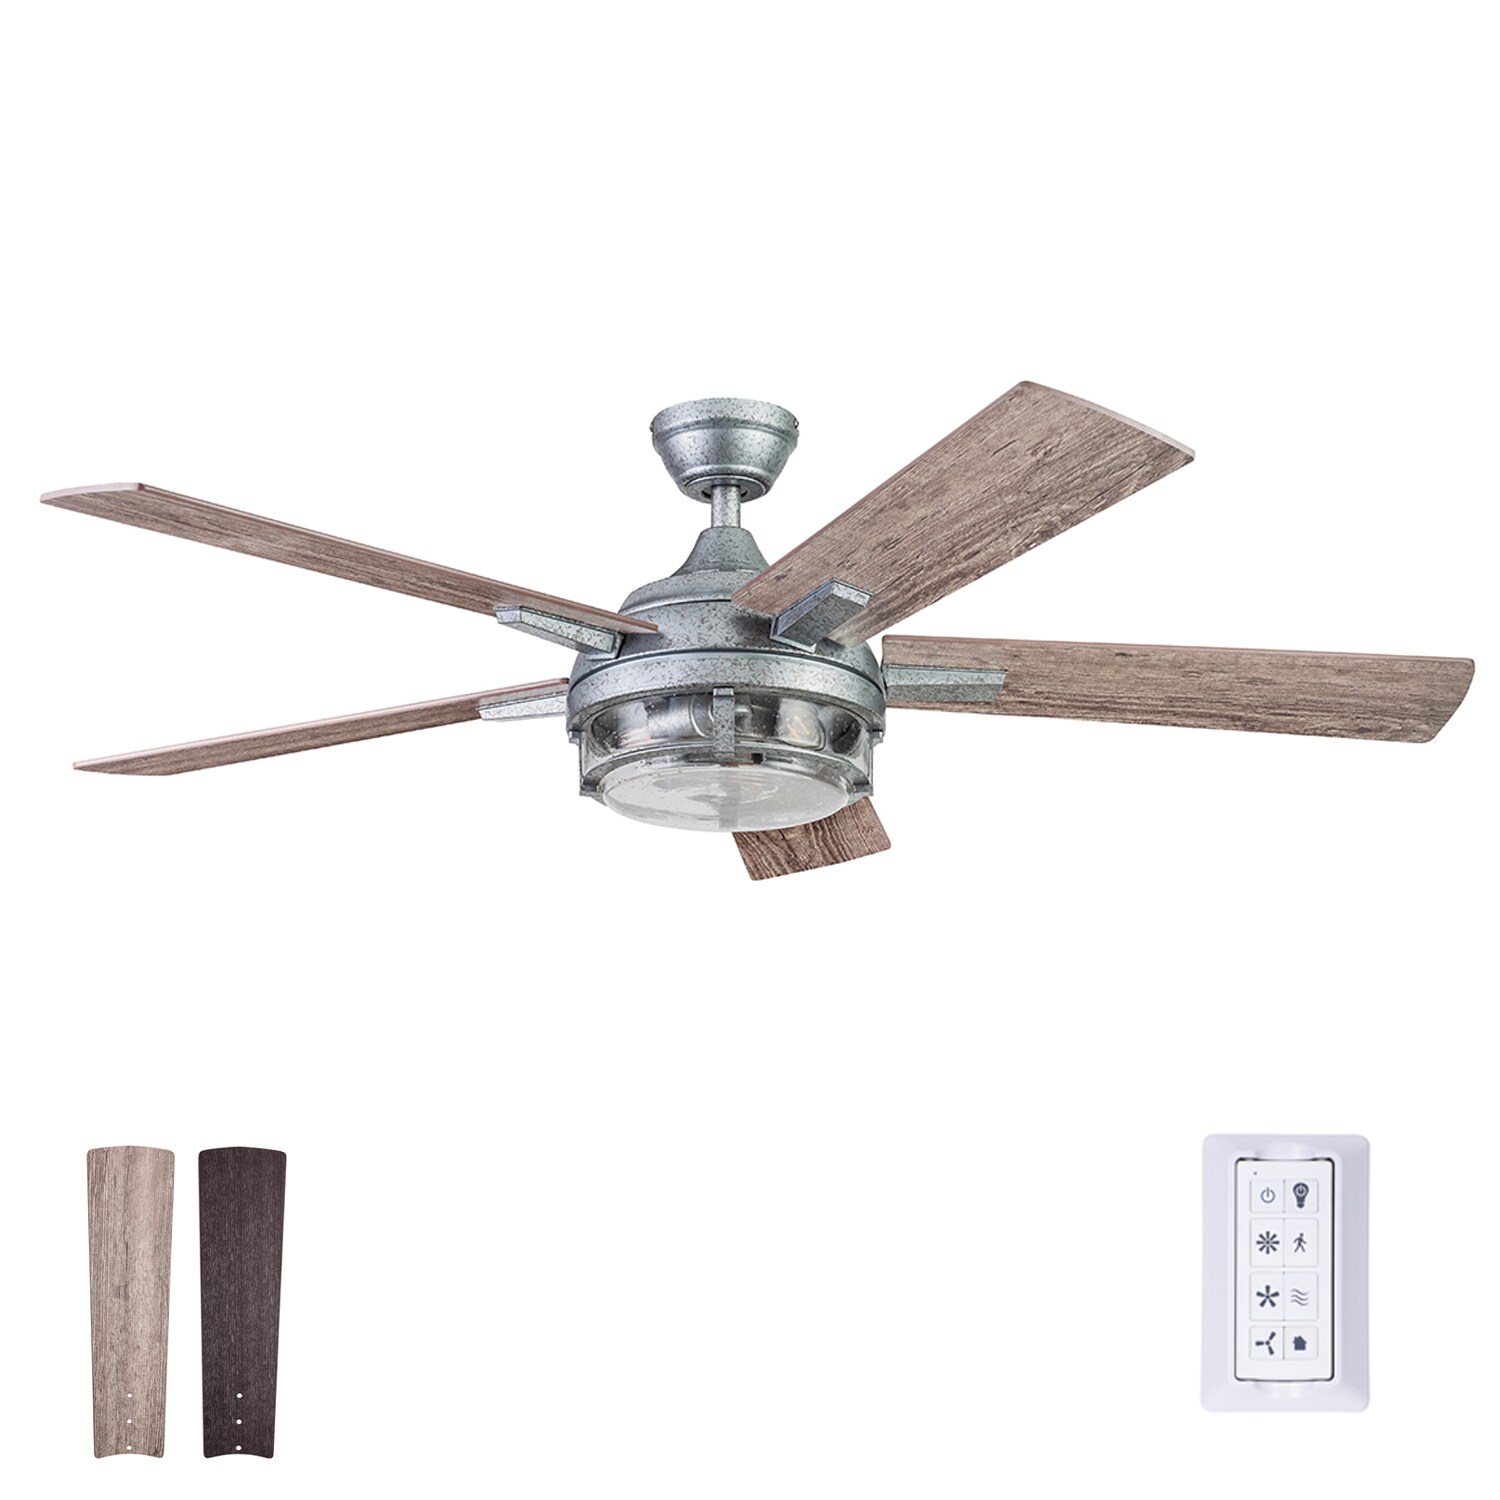 Ceiling Fan 52in LED Light Kit Galvanized Iron Silver Blades 3 Speed Reversible 